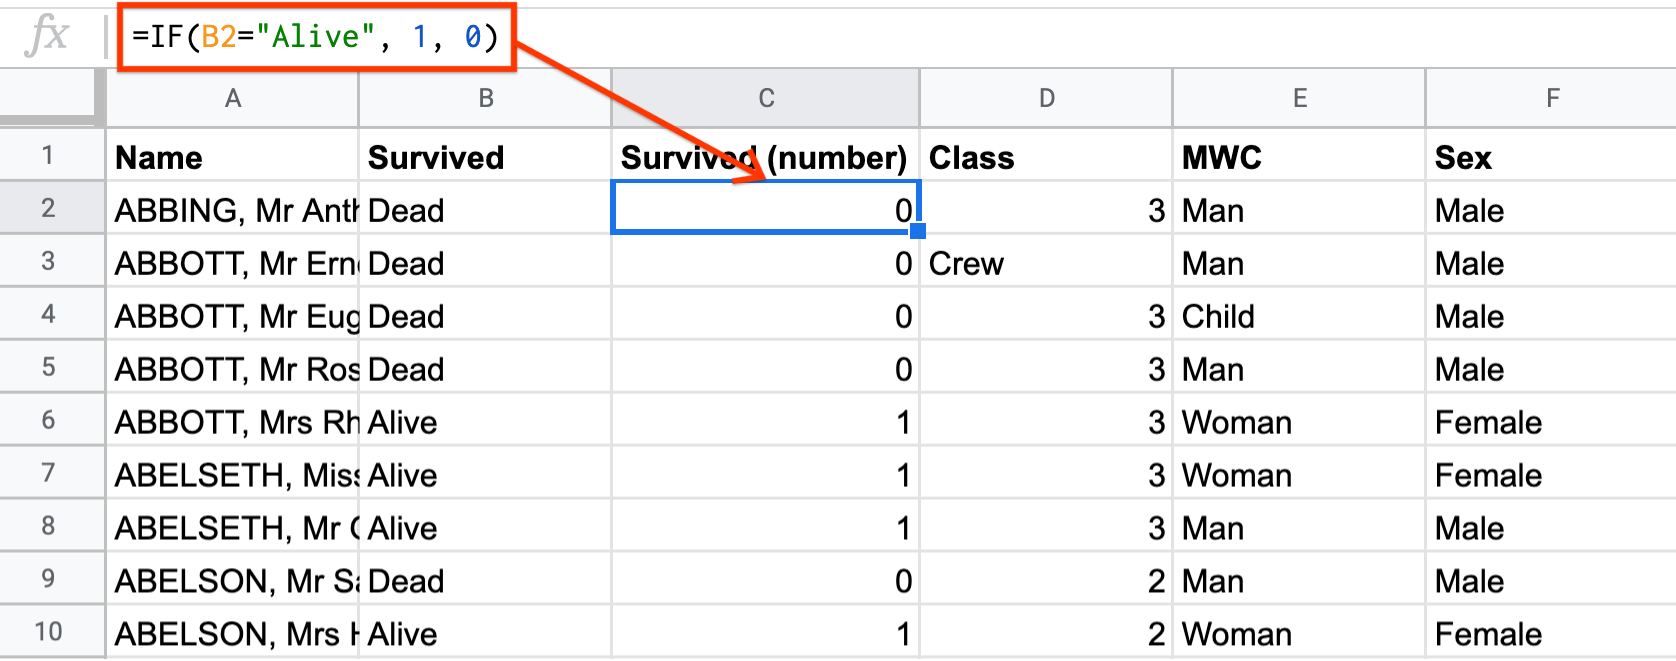 A screenshot from Sheets of a titanic passenger dataset using the IF function to label dead as a 0 and alive as a 1 in a new column called Survived number.